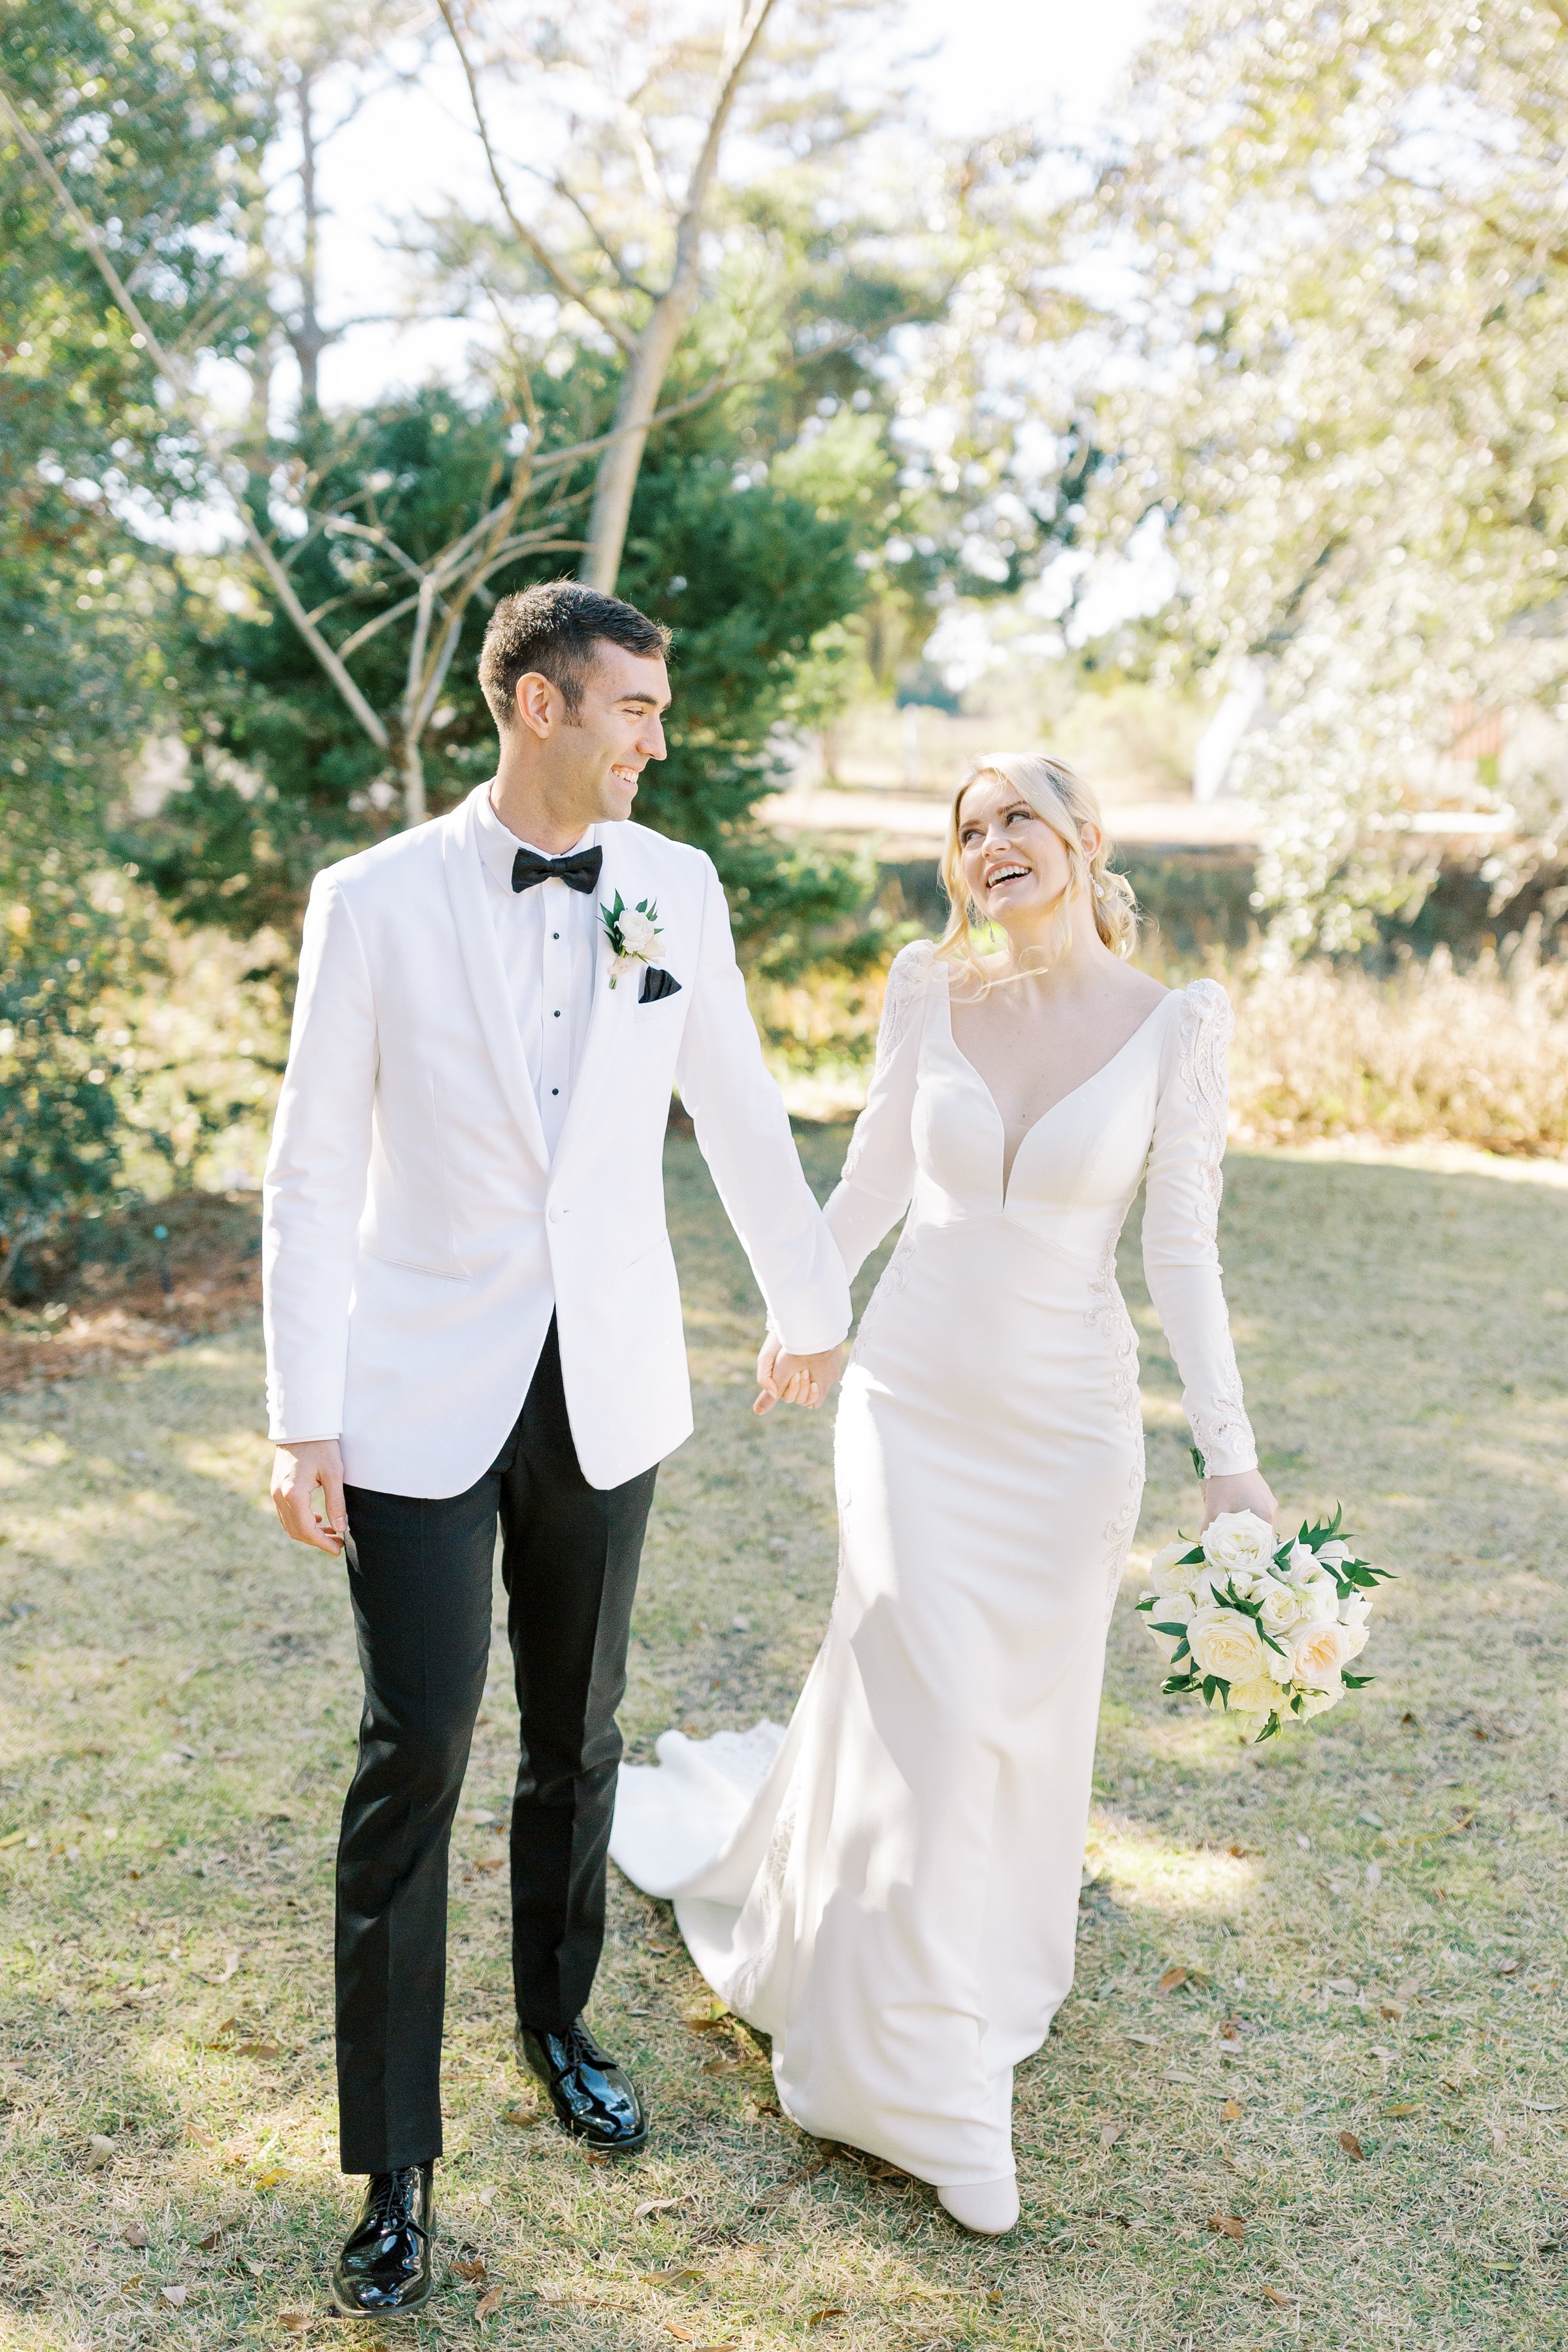 cheyenne-and-nicks-wedding-at-the-tybee-island-wedding-chapel-planned-by-savannah-wedding-planner-ivory-and-beau-with-sottero-and-midgley-gown-from-savannah-bridal-shop-and-wedding-florals-from-savannah-florist-3.jpg